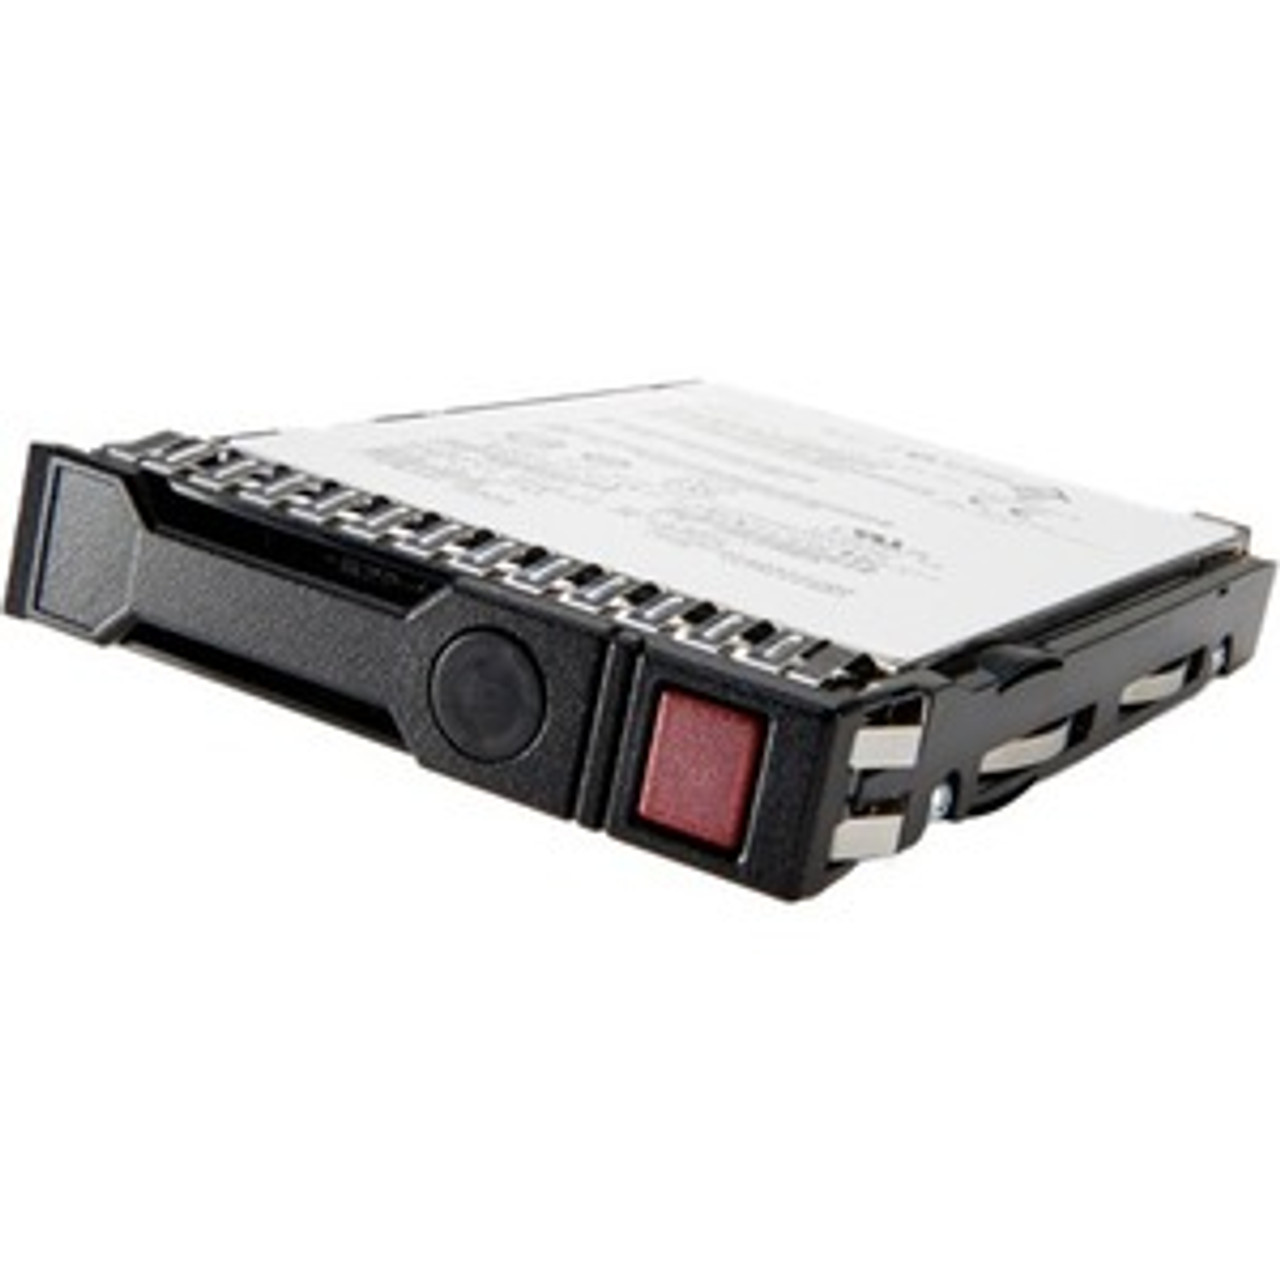 765466-H21#0D1 HPE 2TB 7200RPM SAS 12Gbps Midline 2.5-inch Internal Hard Drive with Smart Carrier